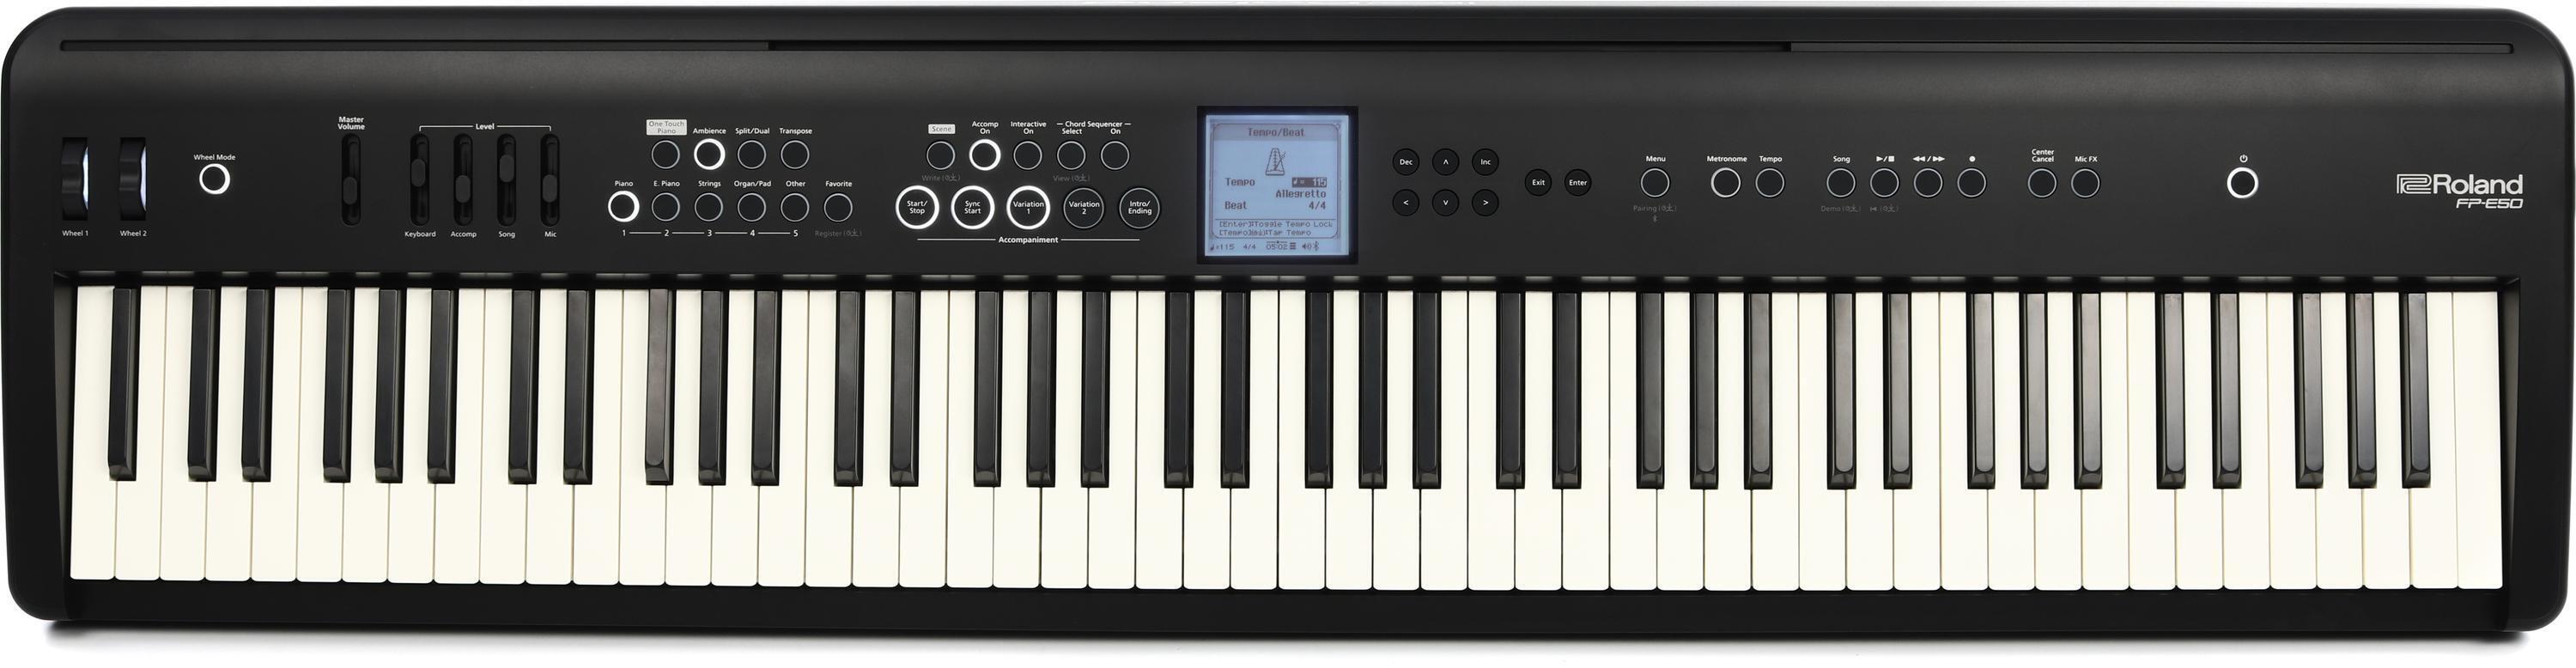 Roland F-20 Digital Piano - Contemporary Black | Sweetwater